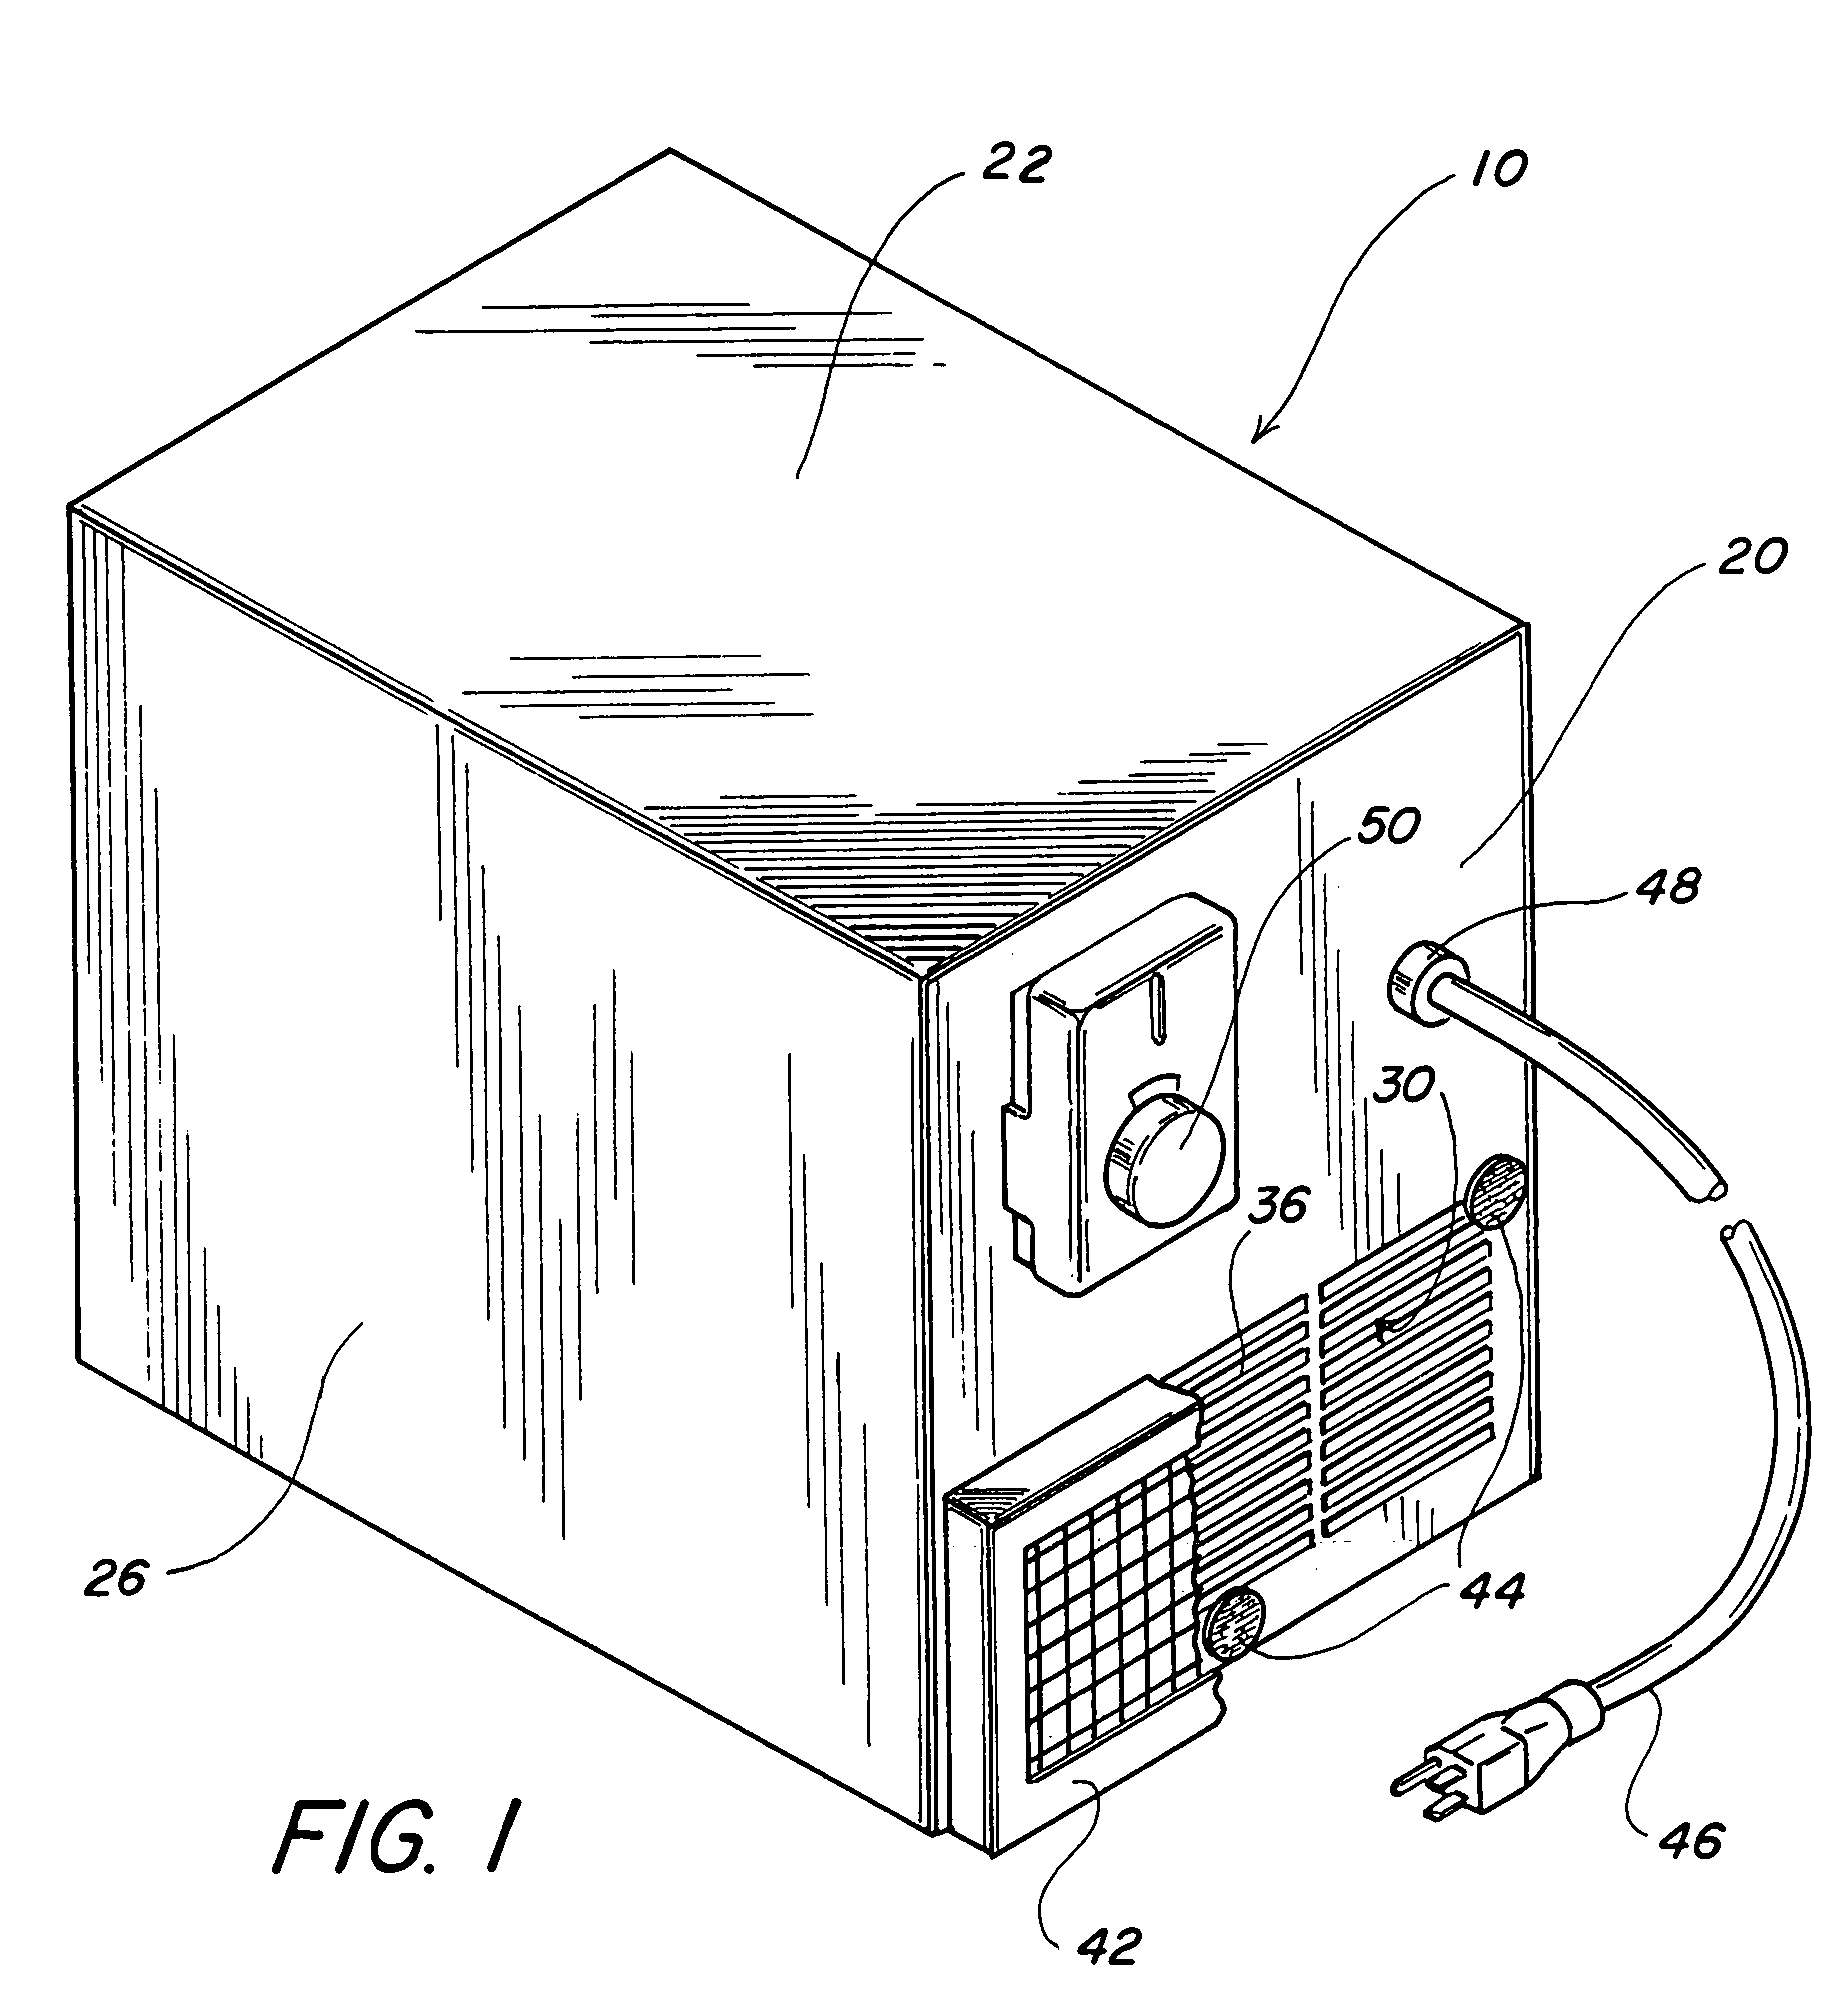 Space heater with pretreated heat exchanger